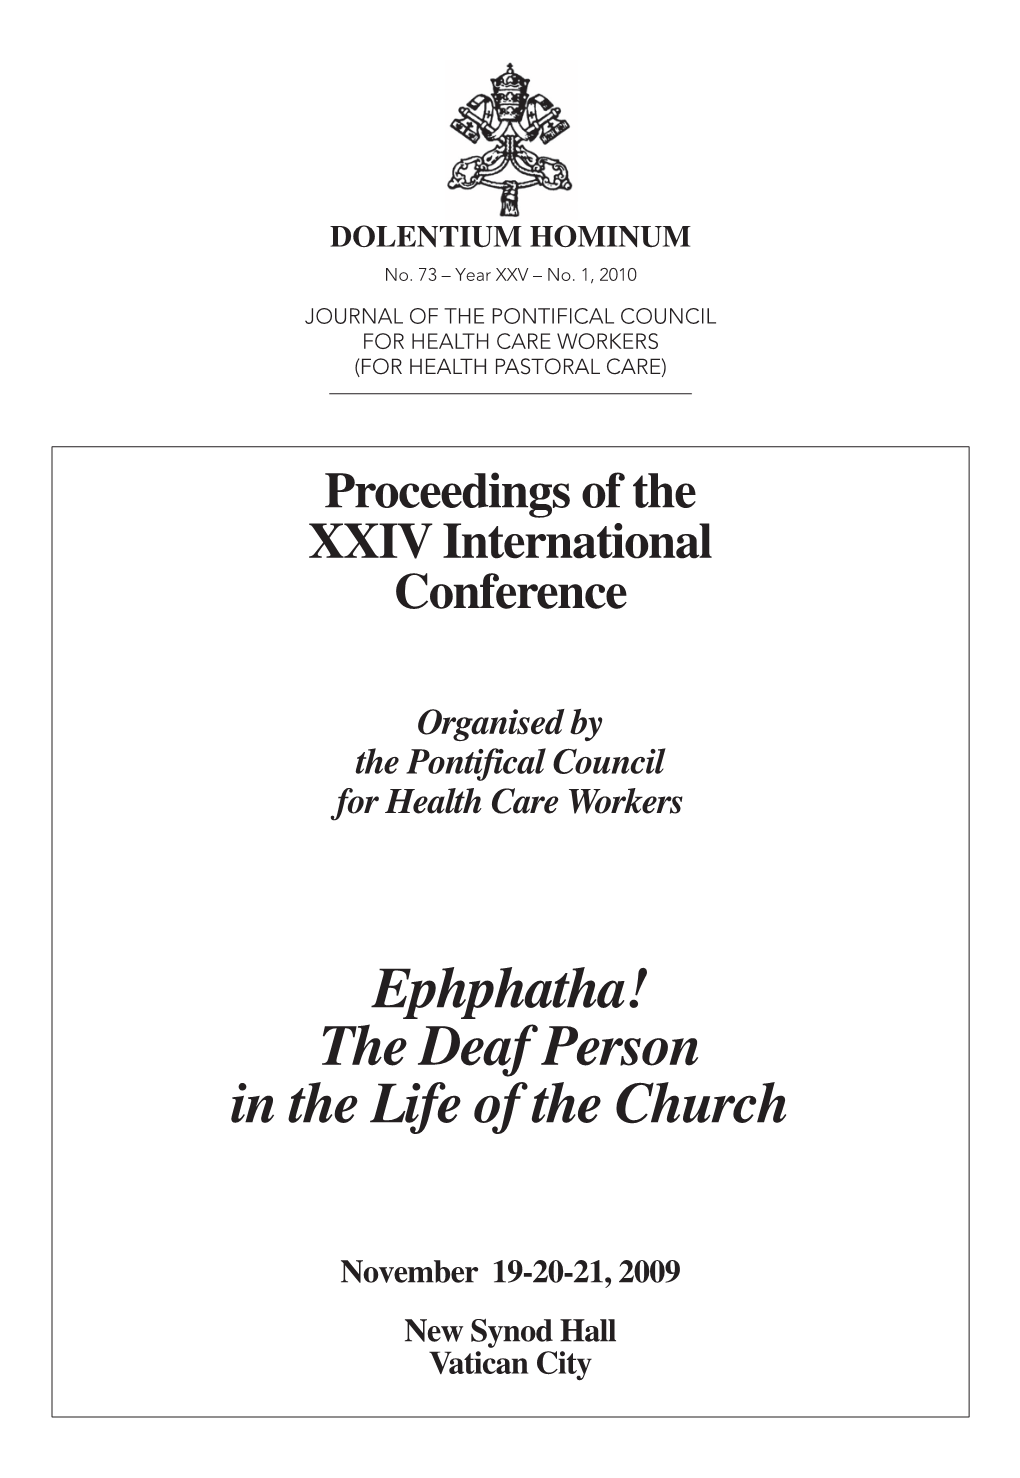 Ephphatha! the Deaf Person in the Life of the Church